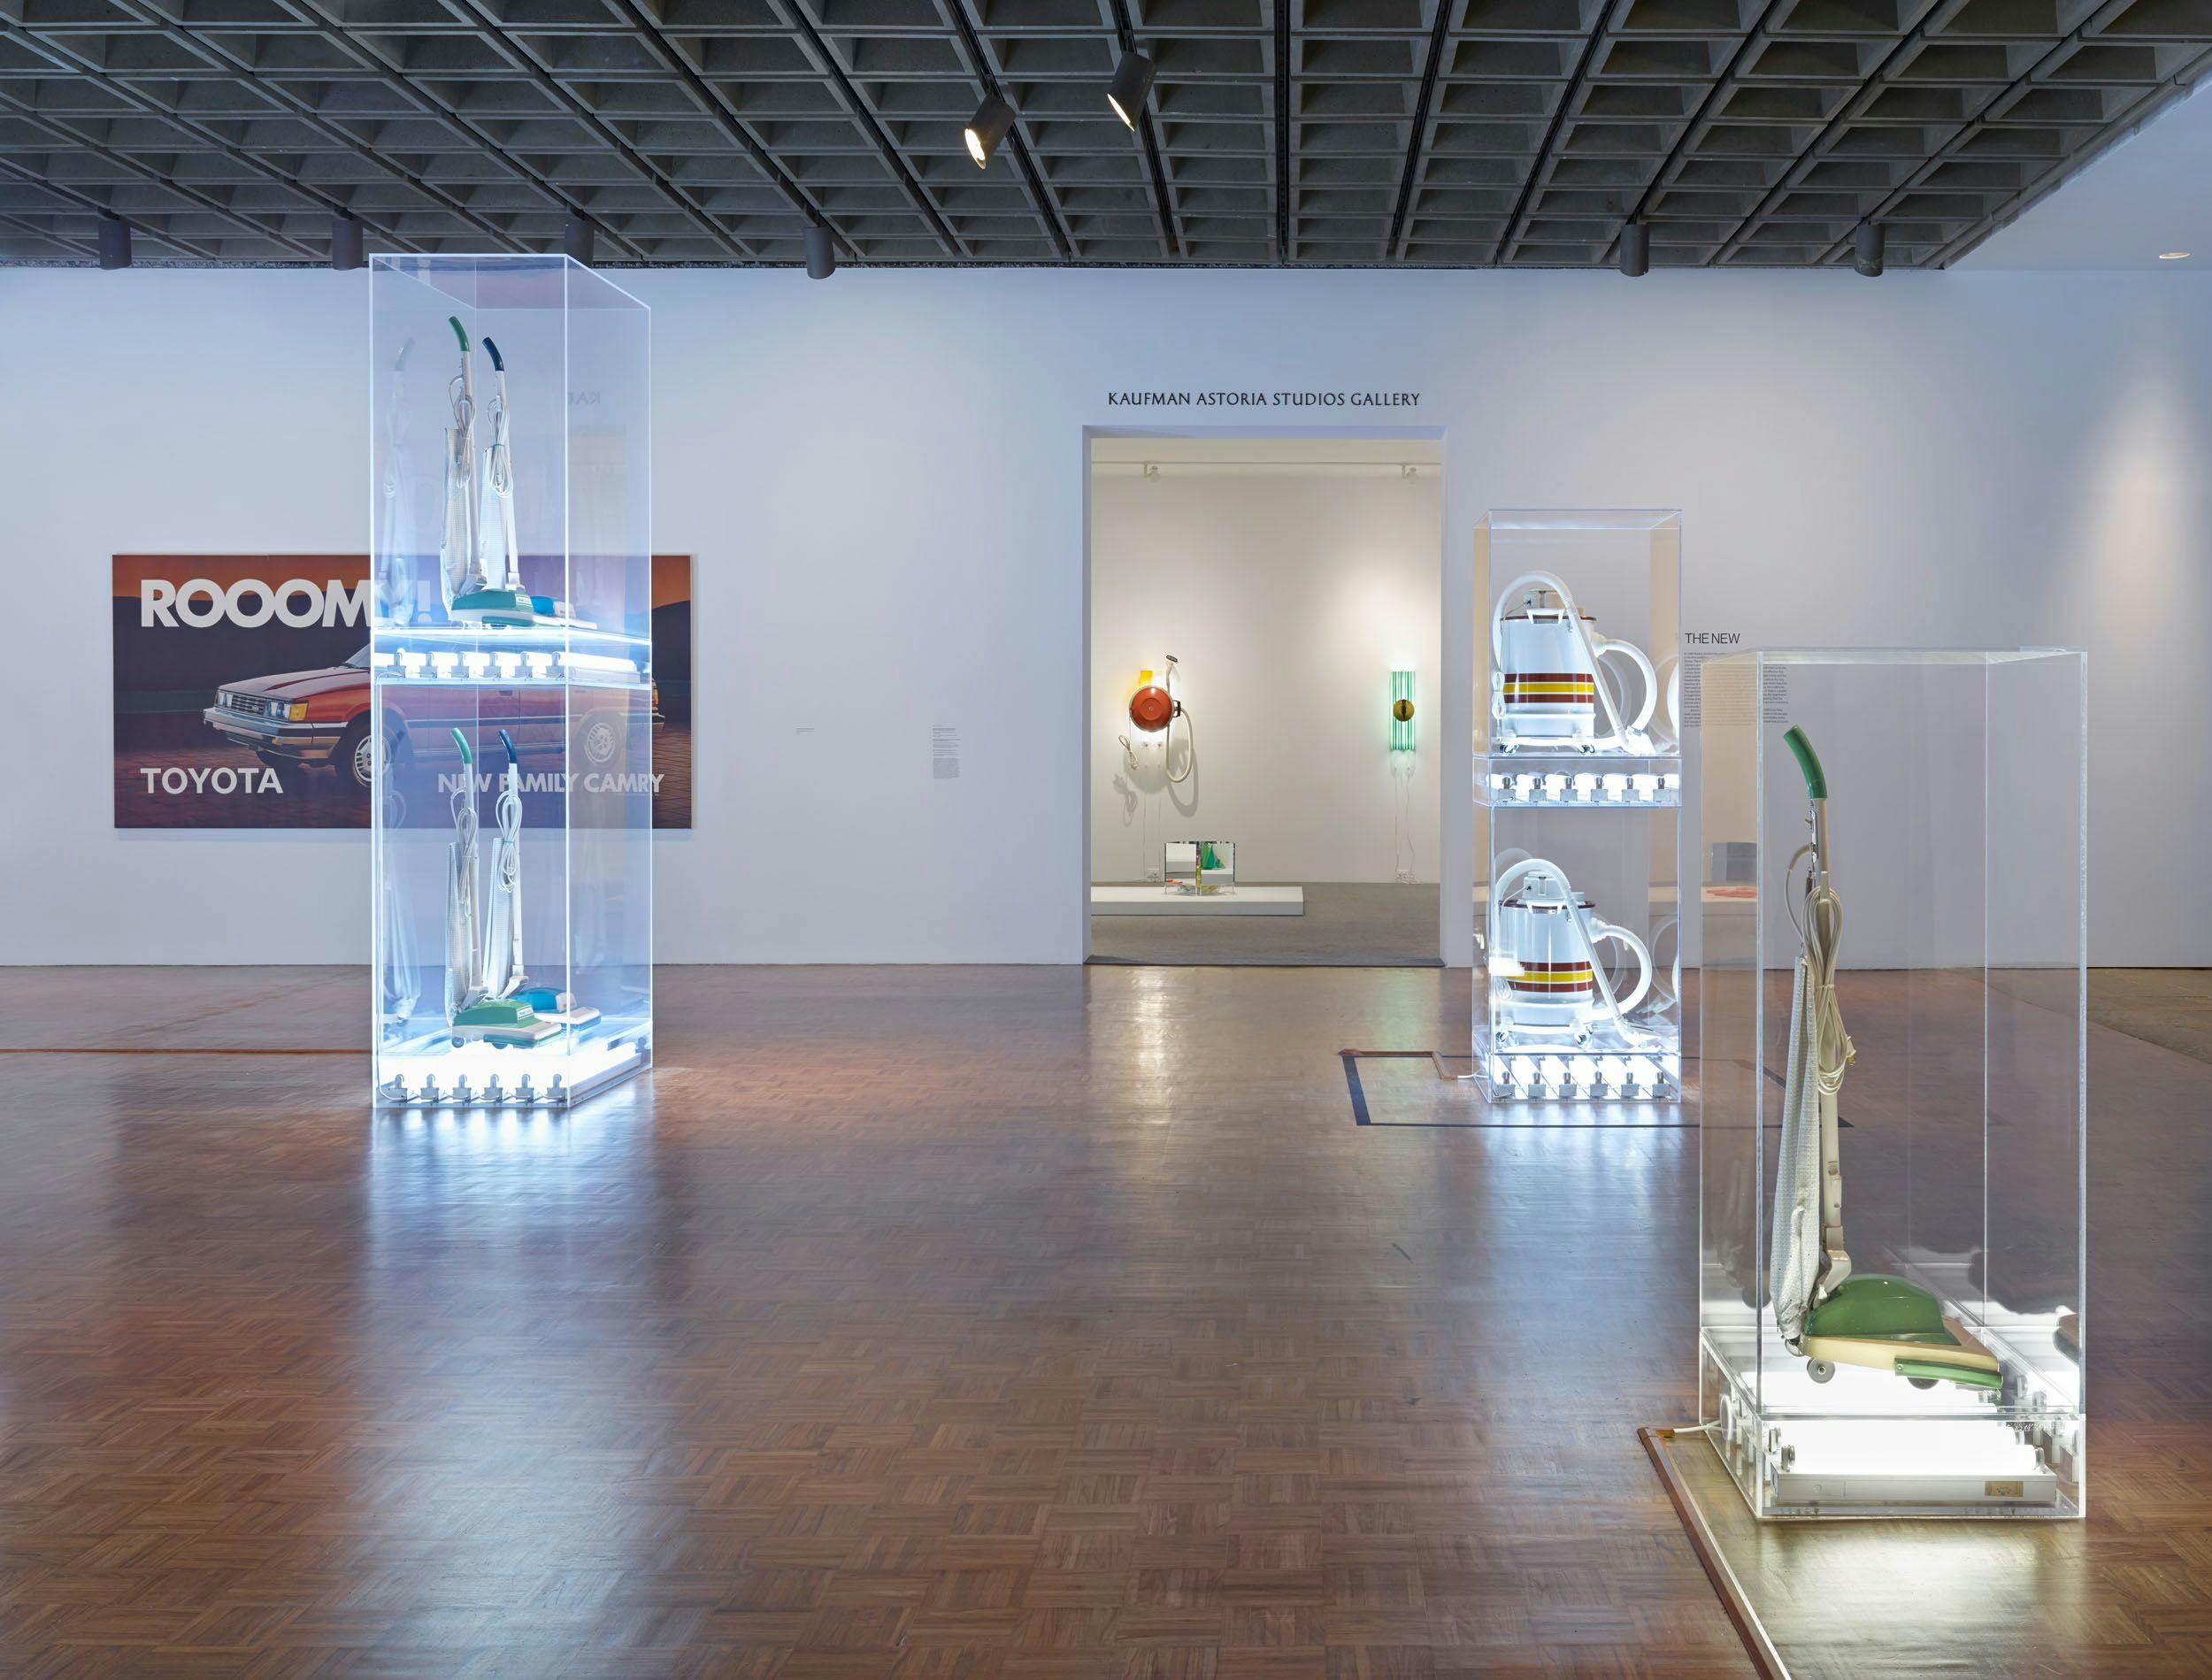 Installation view of the exhibition,¬†Jeff Koons: A Retrospective¬†at the Whitney Museum of American Art in New York, dated 2014.